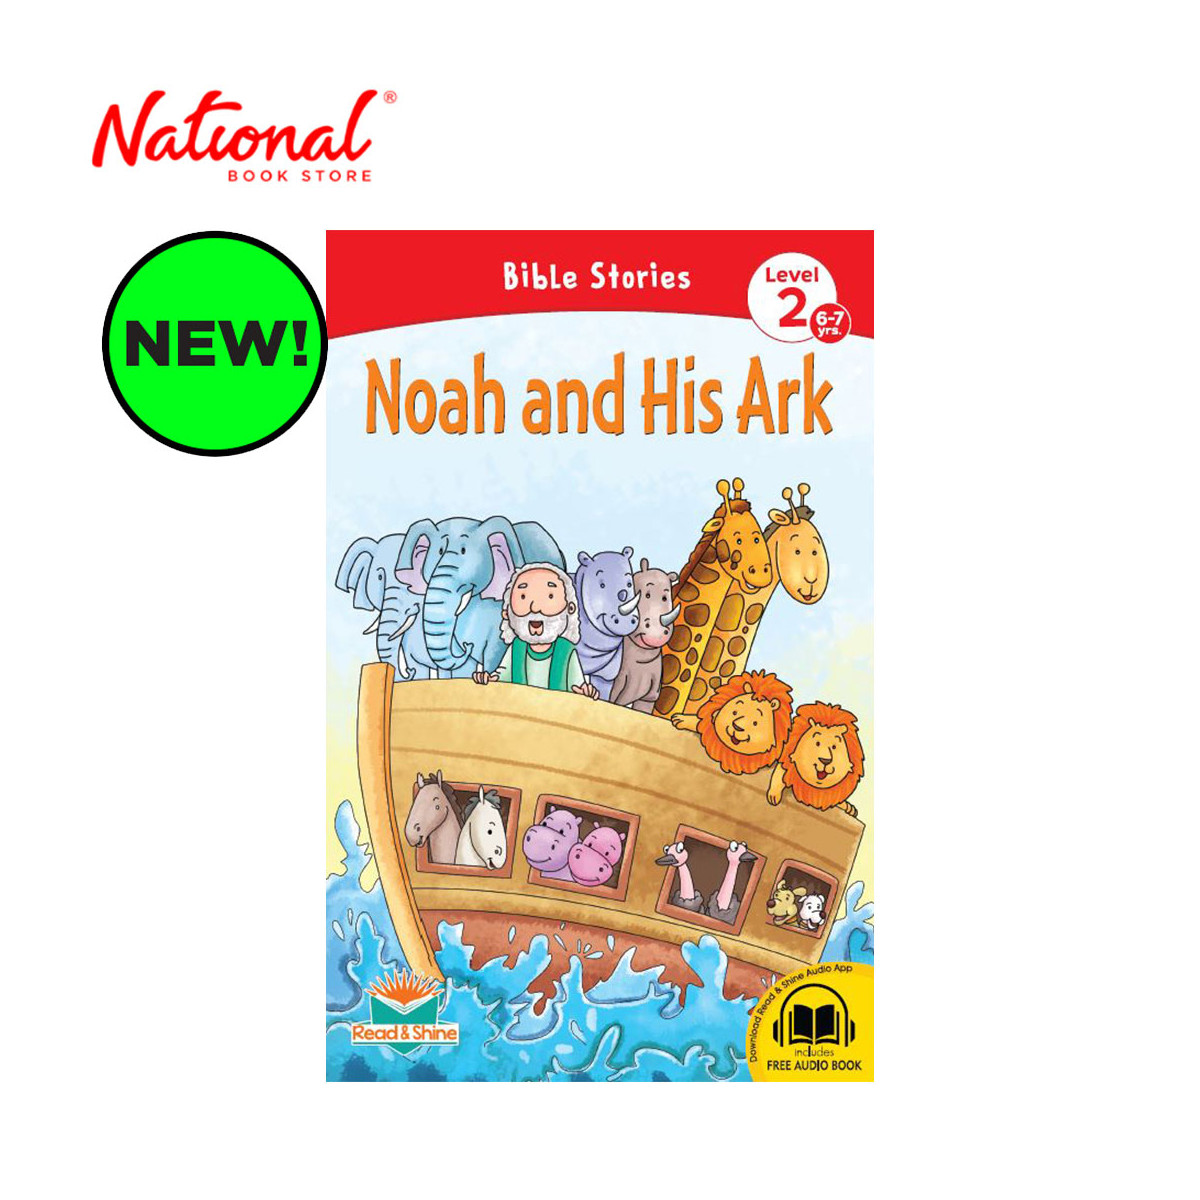 Noah And His Ark Level 2 - Trade Paperback - Bible Stories for Kids